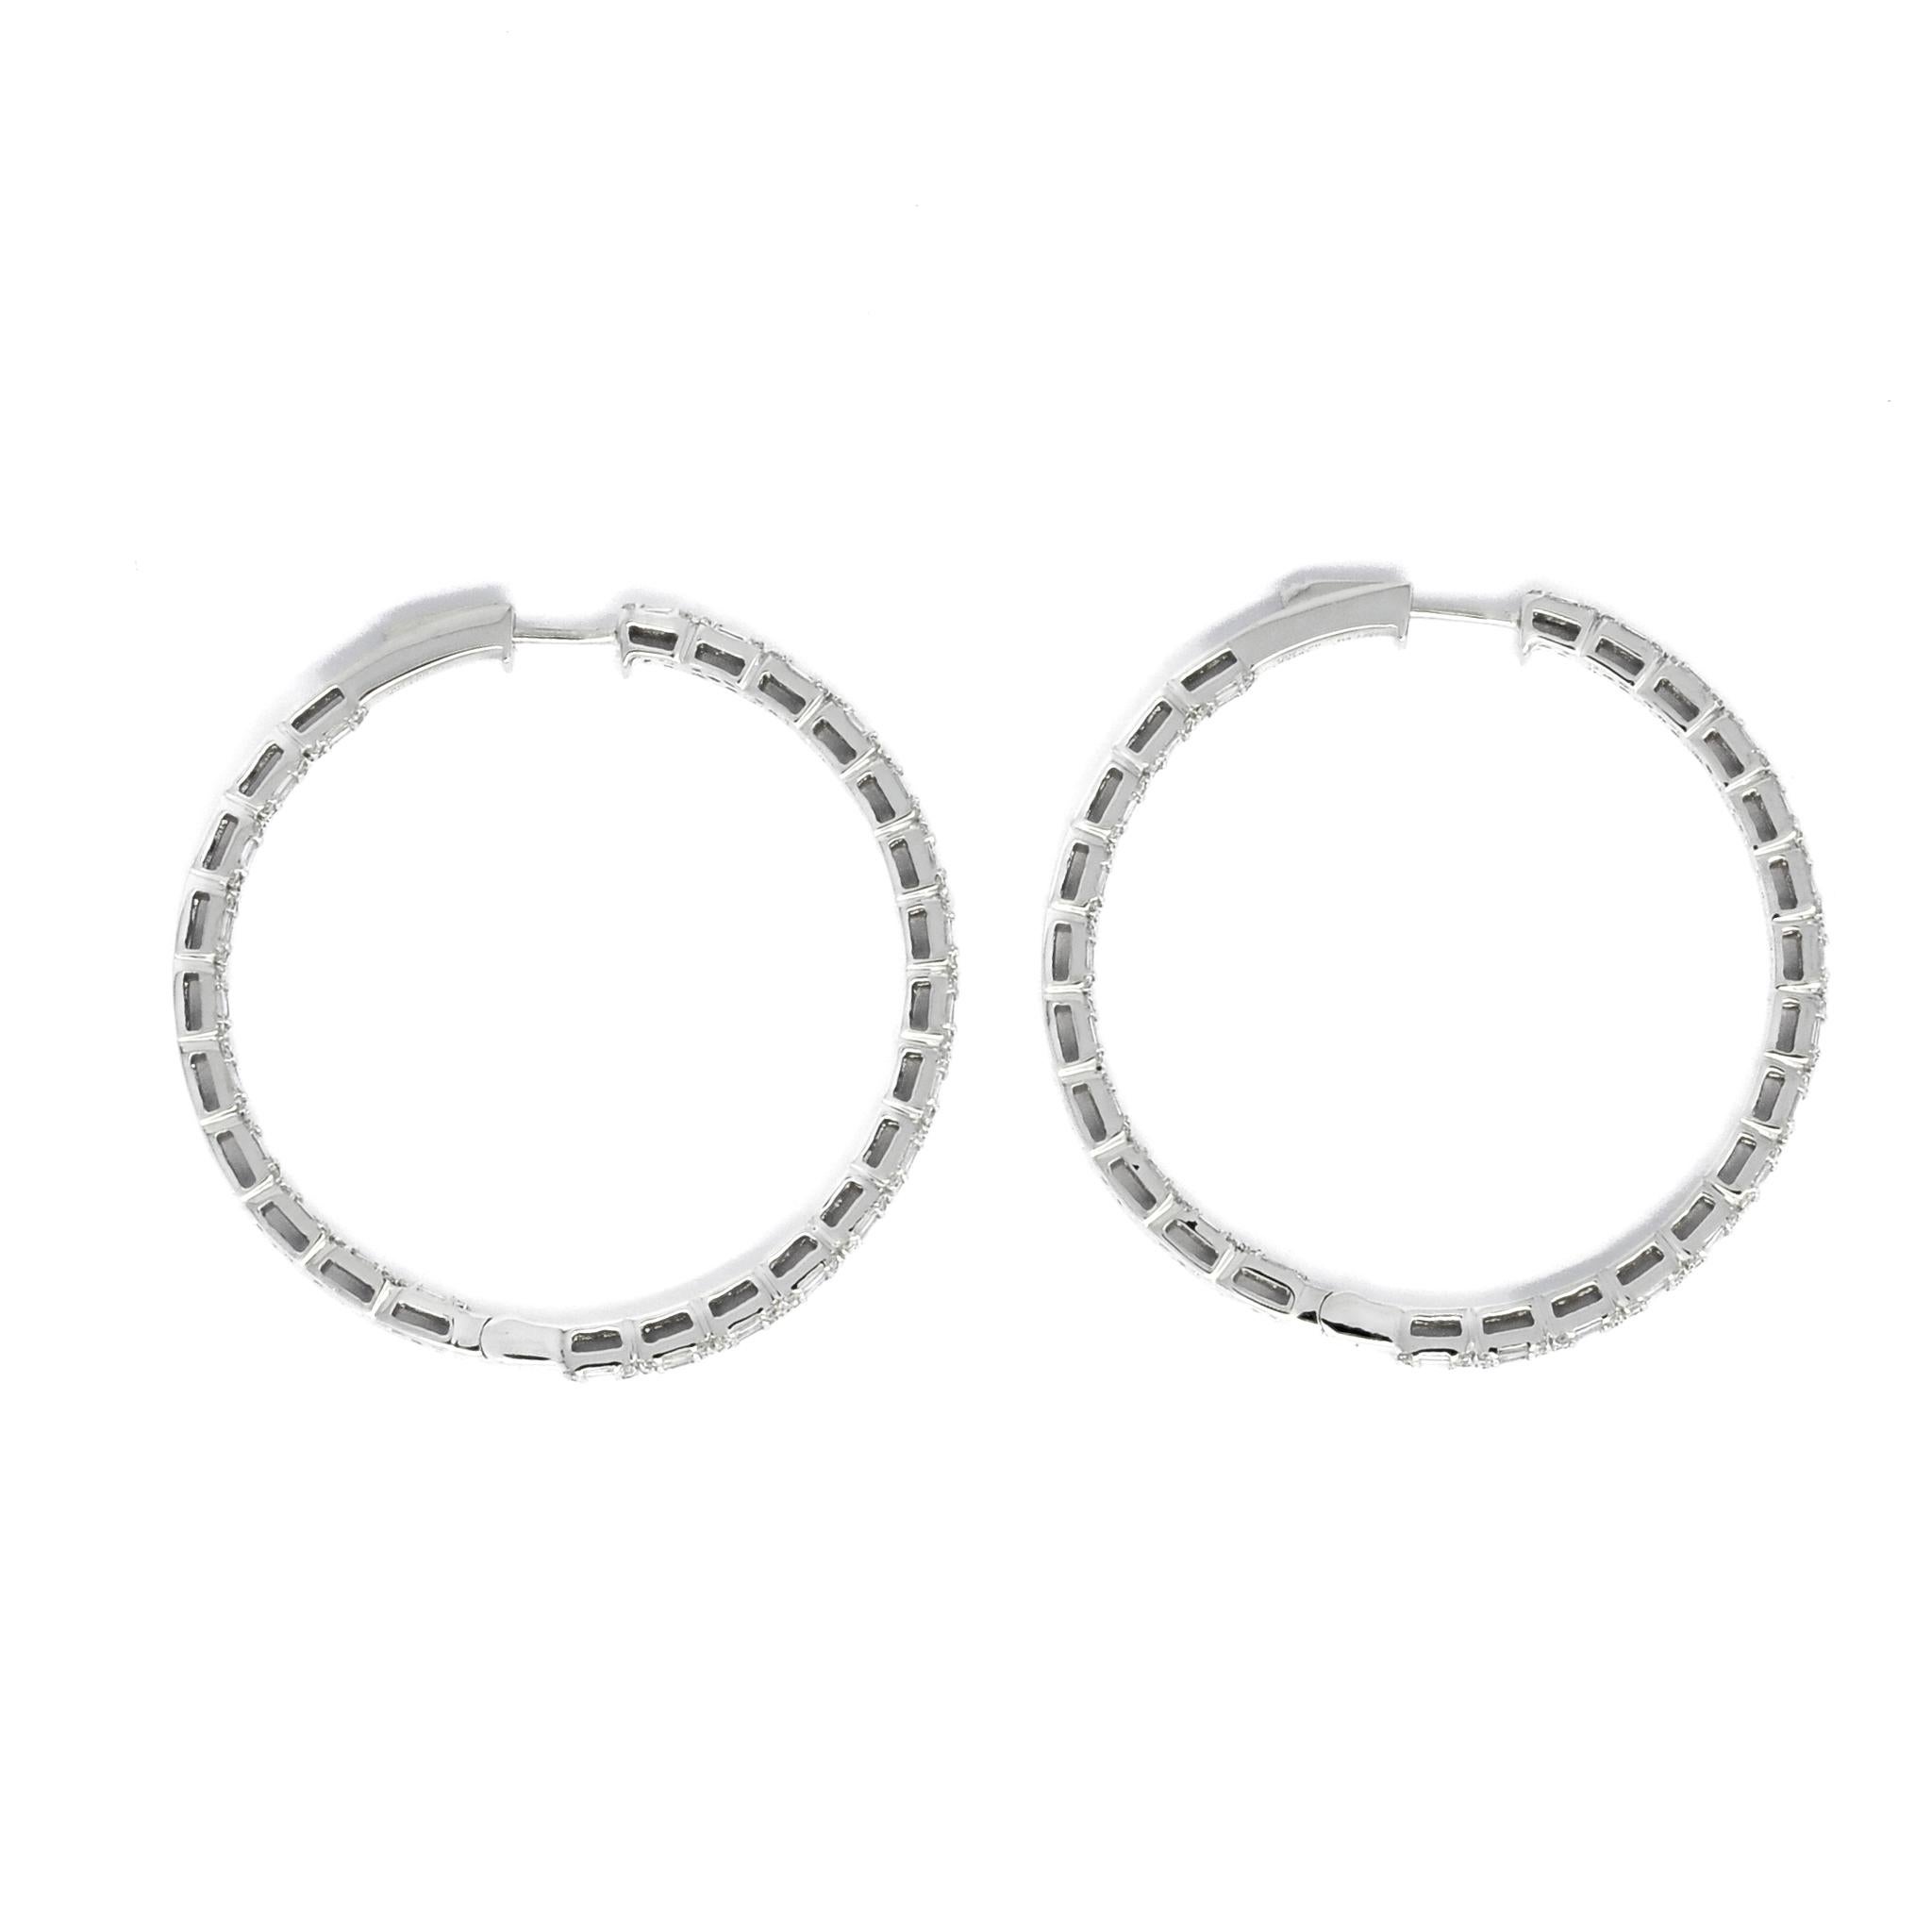  Natural Dimond 2.13 Carats 18KT White Gold 'in and Out' Hoop Earring E20248 In New Condition For Sale In Antwerpen, BE